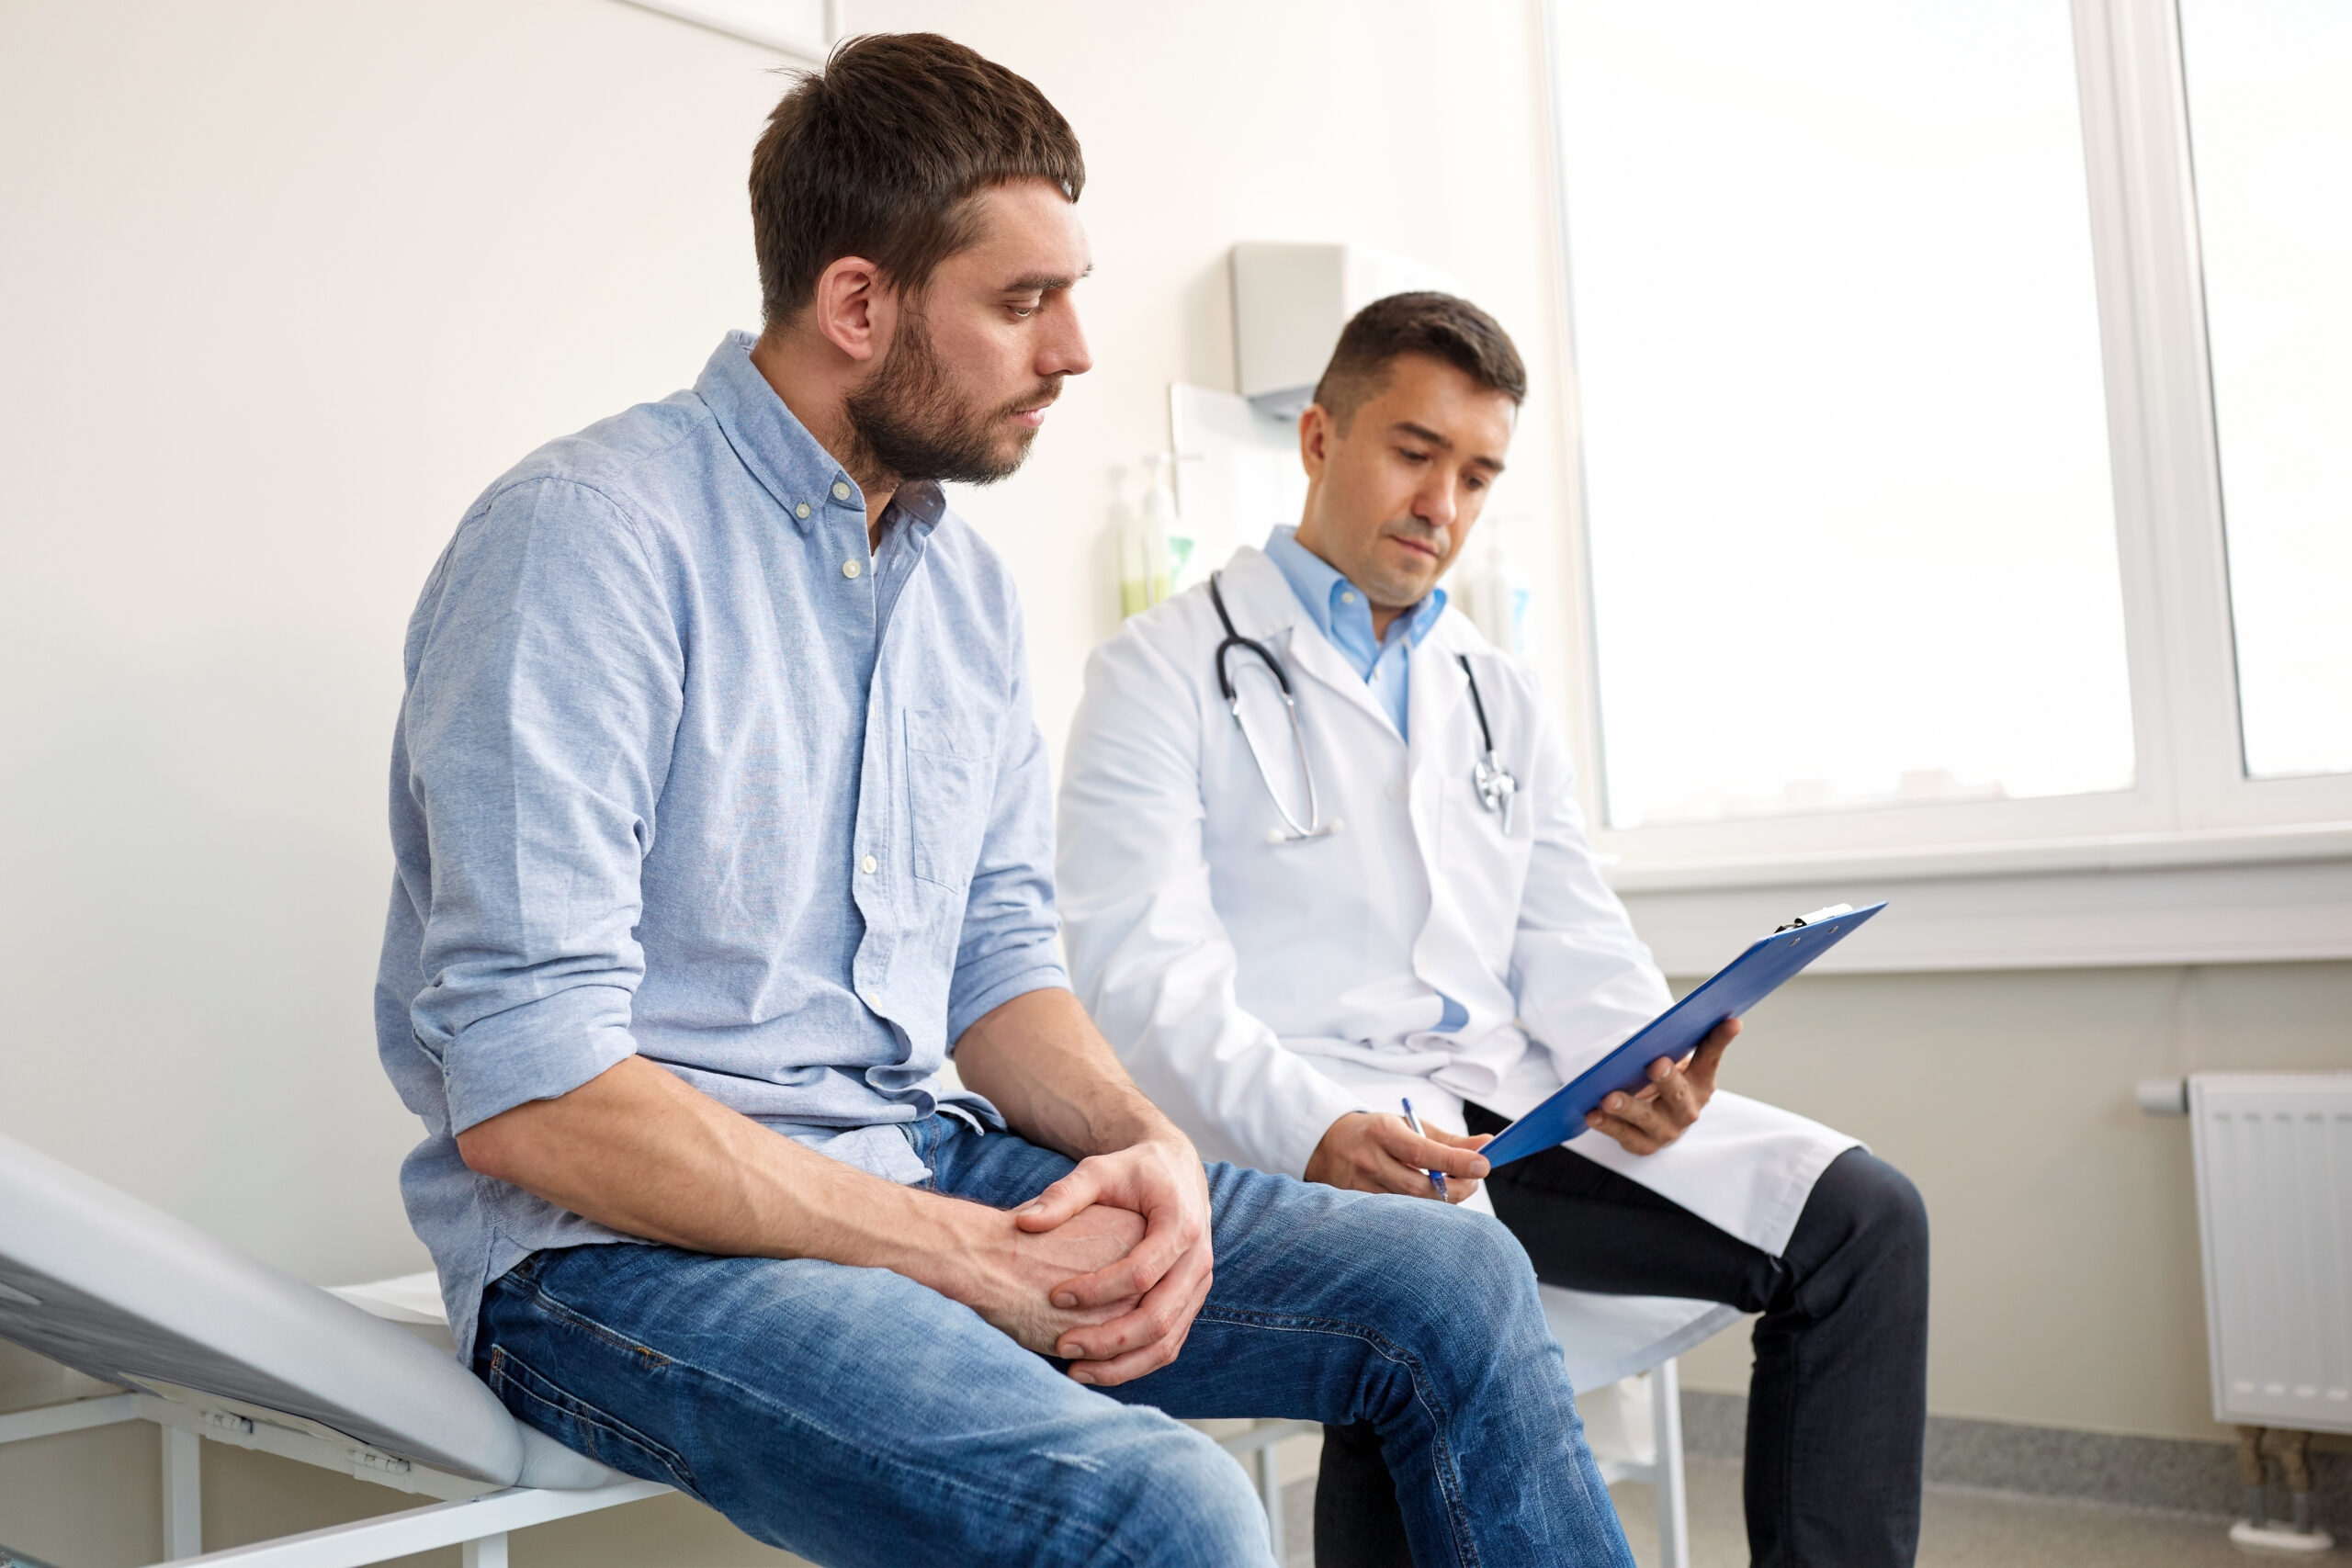 Addressing Common Concerns and Questions About Vasectomy